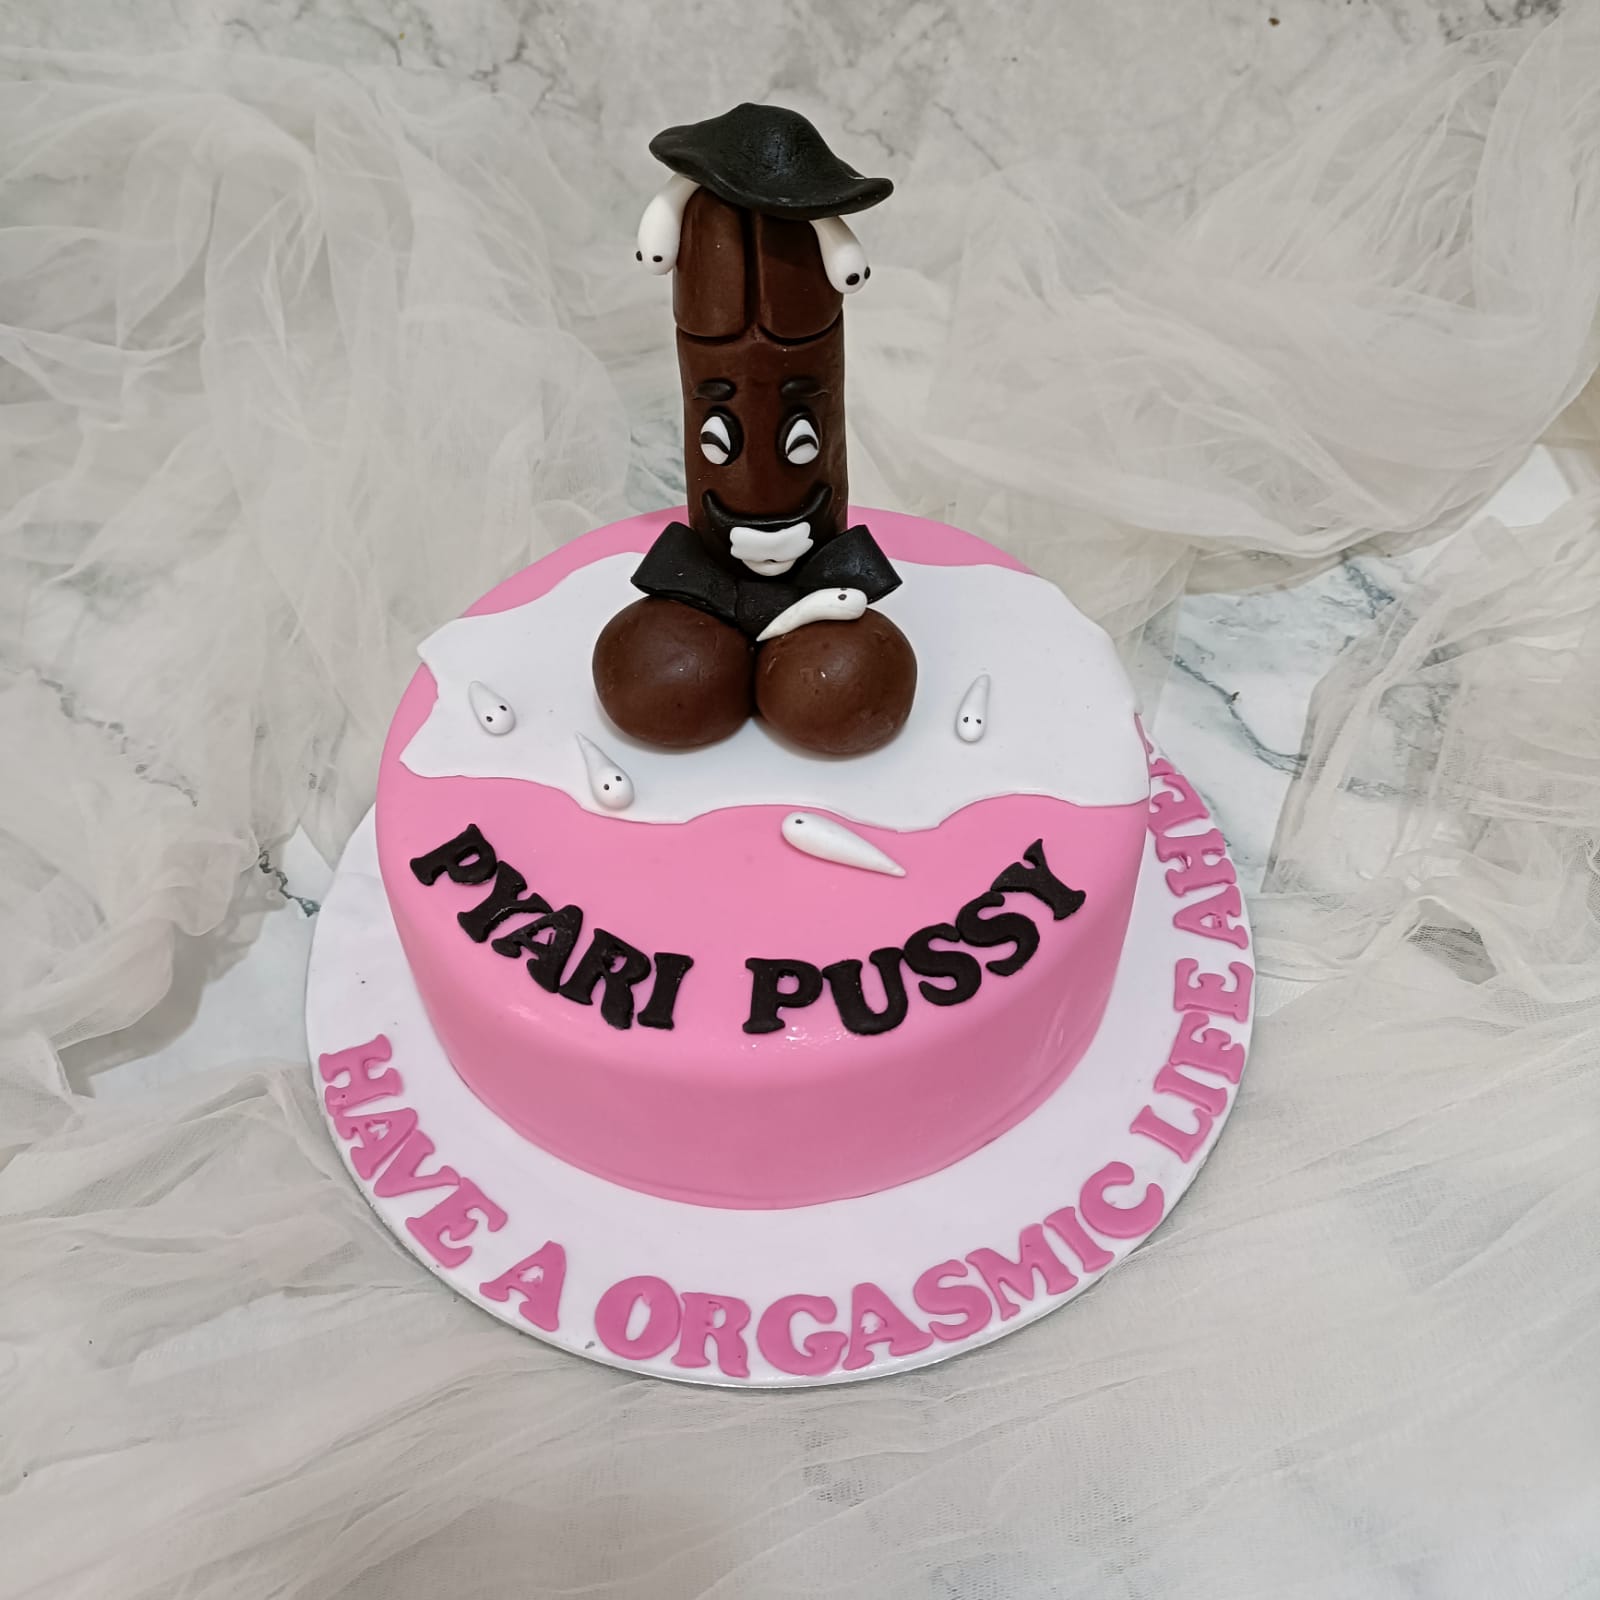 Funny Cakes for Adults | Adult Cake | Bachelor cake | Yummy Cake